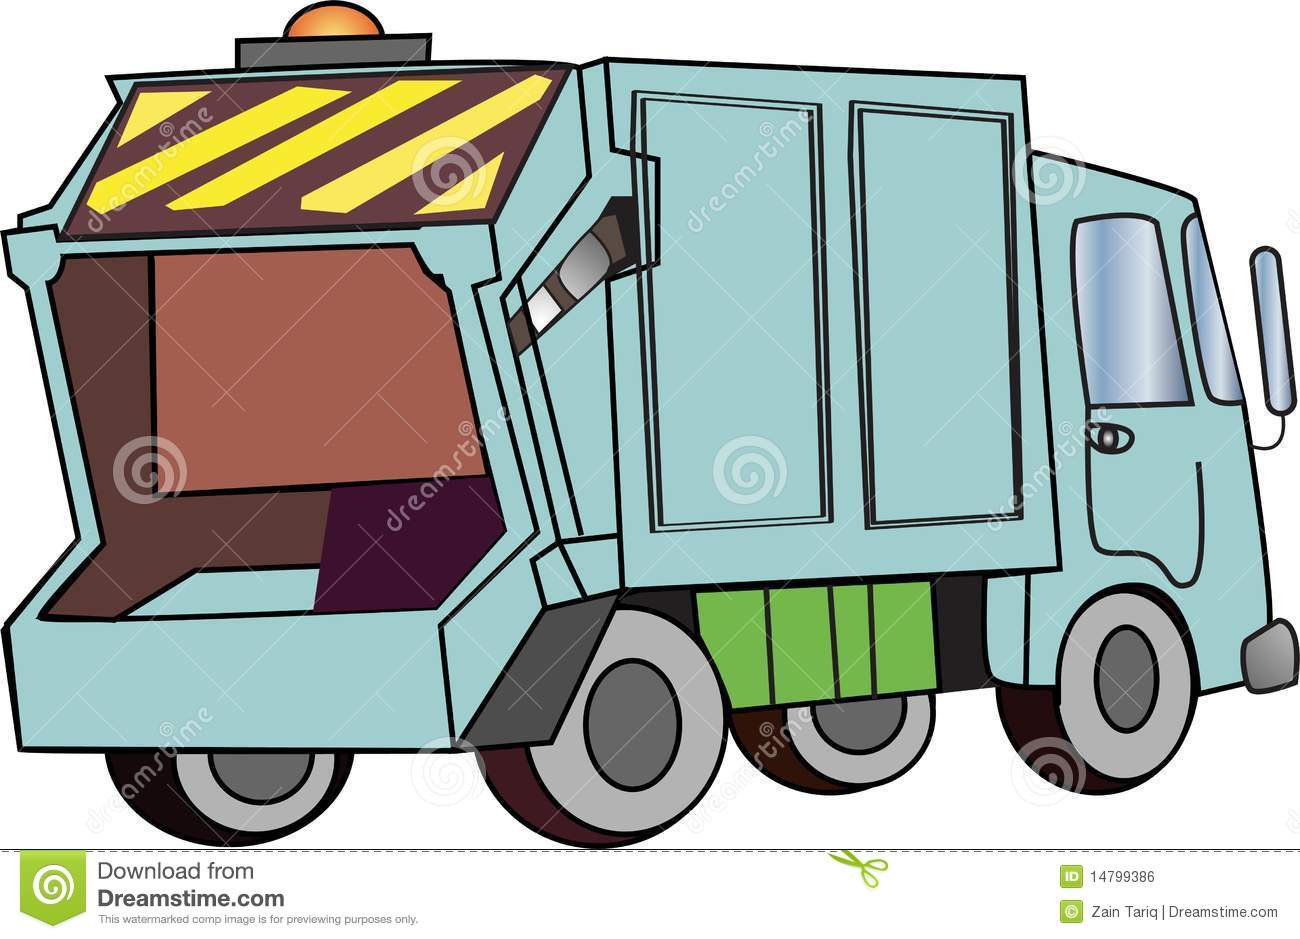 garbage truck clipart - Clip Art Library